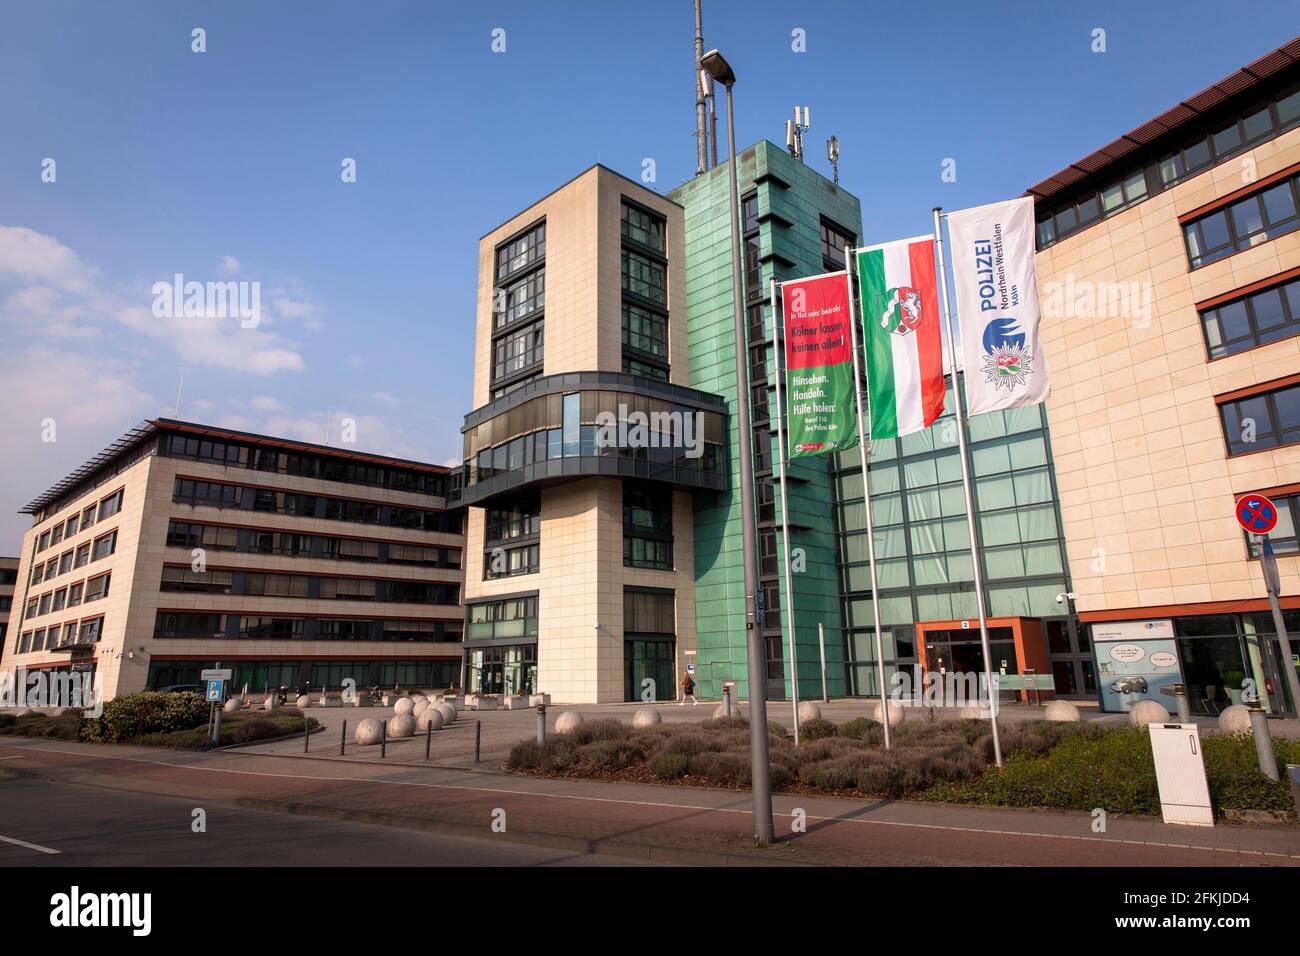 Koeln Kalk High Resolution Stock Photography and Images - Alamy